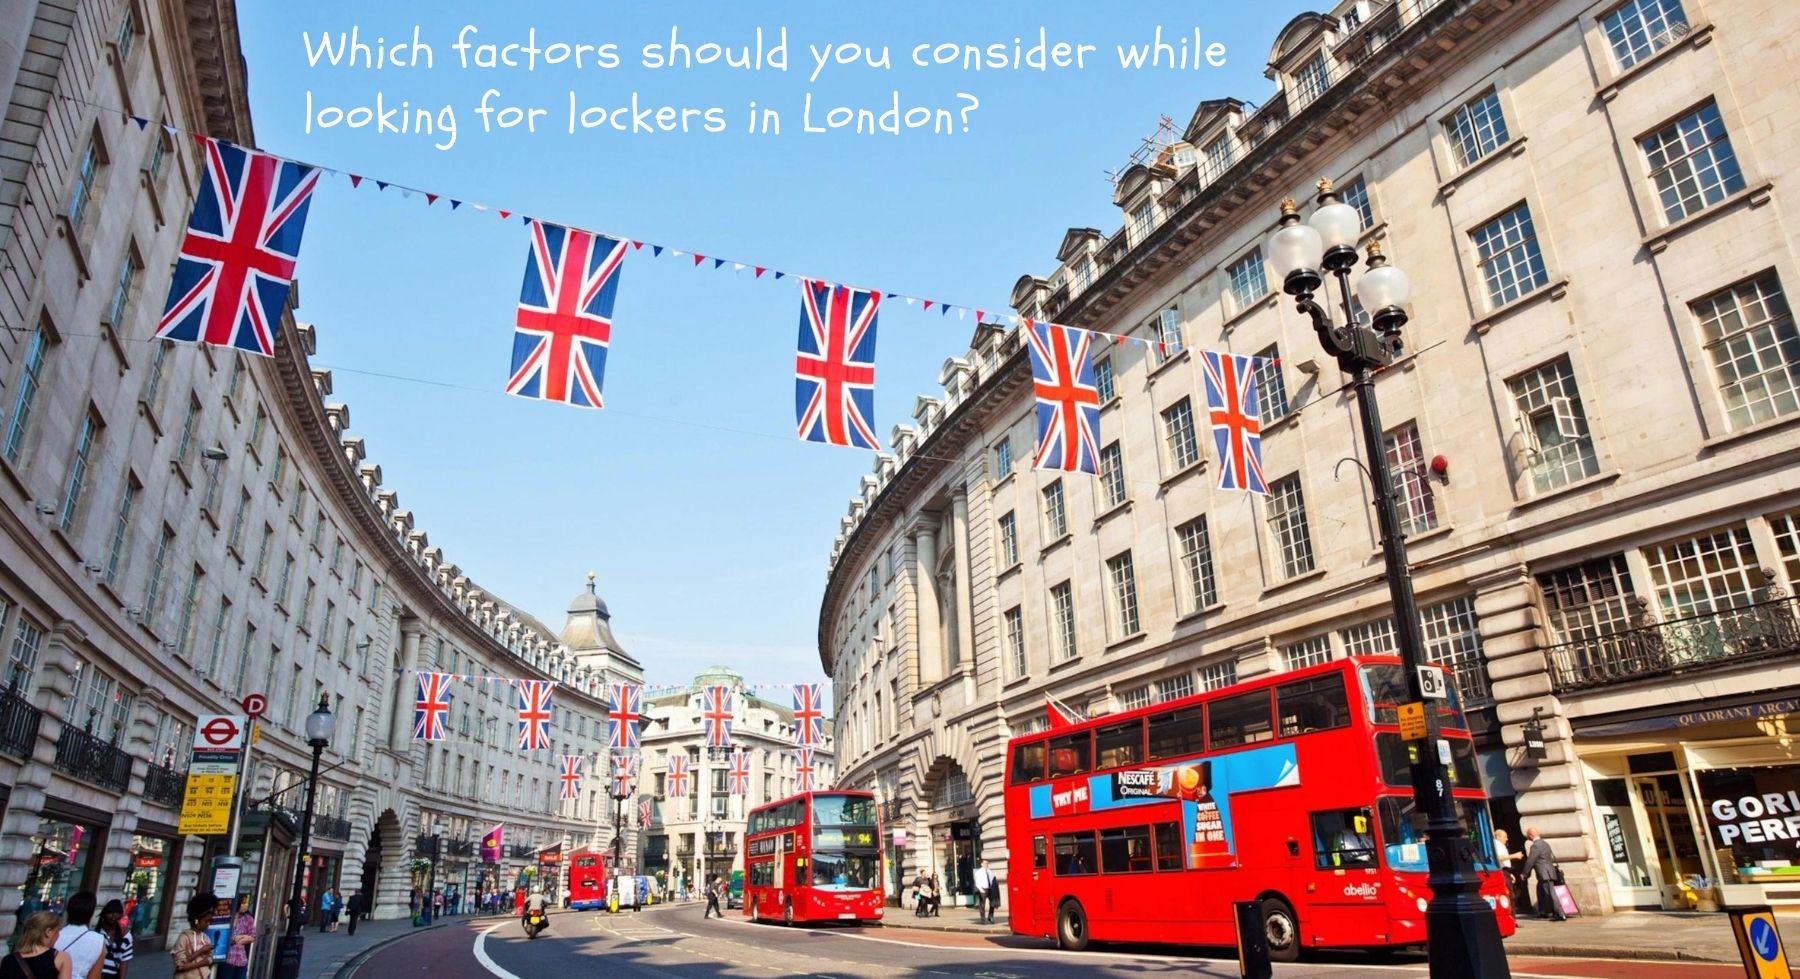 Which factors should you consider while looking for lockers in London?